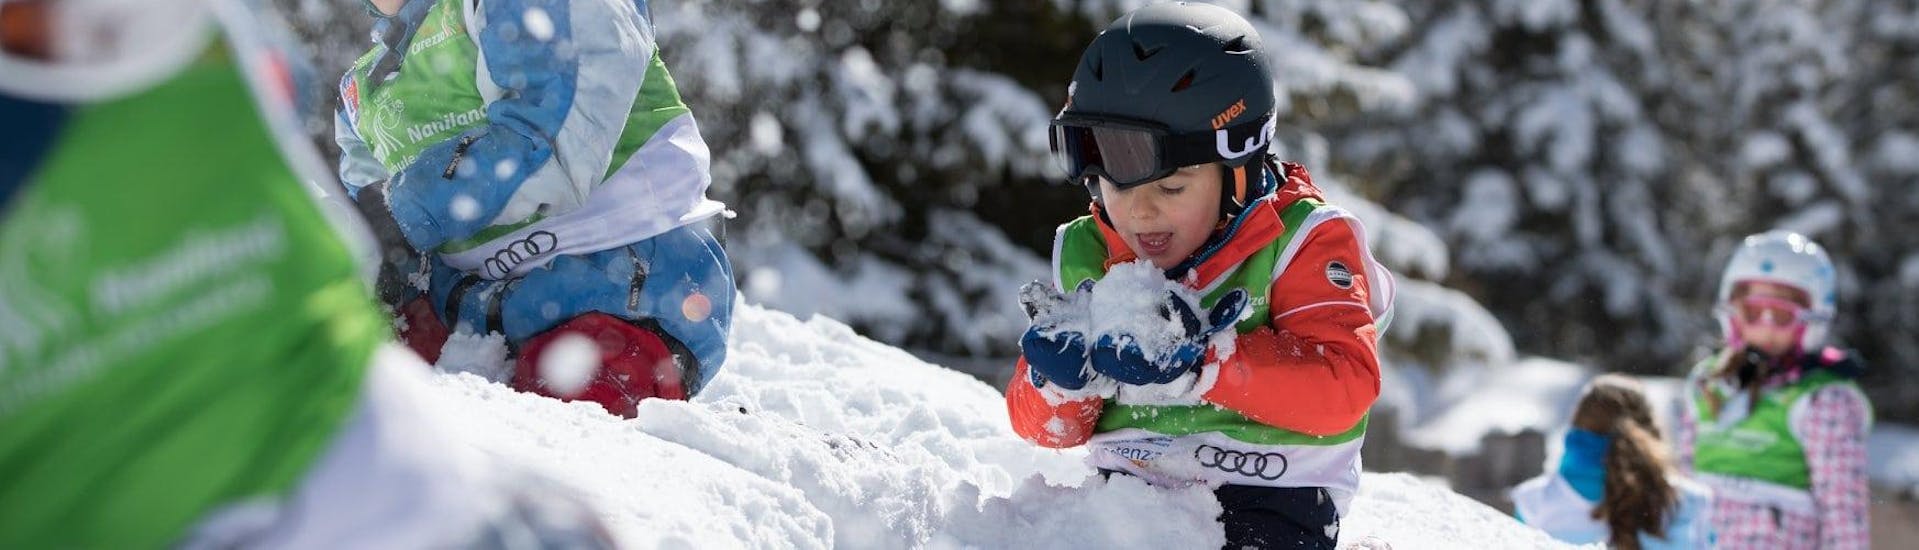 Kids are playing in the snow during Kids Ski Lessons (2-4 years) - First Timer organized by the Carezza Skischool.